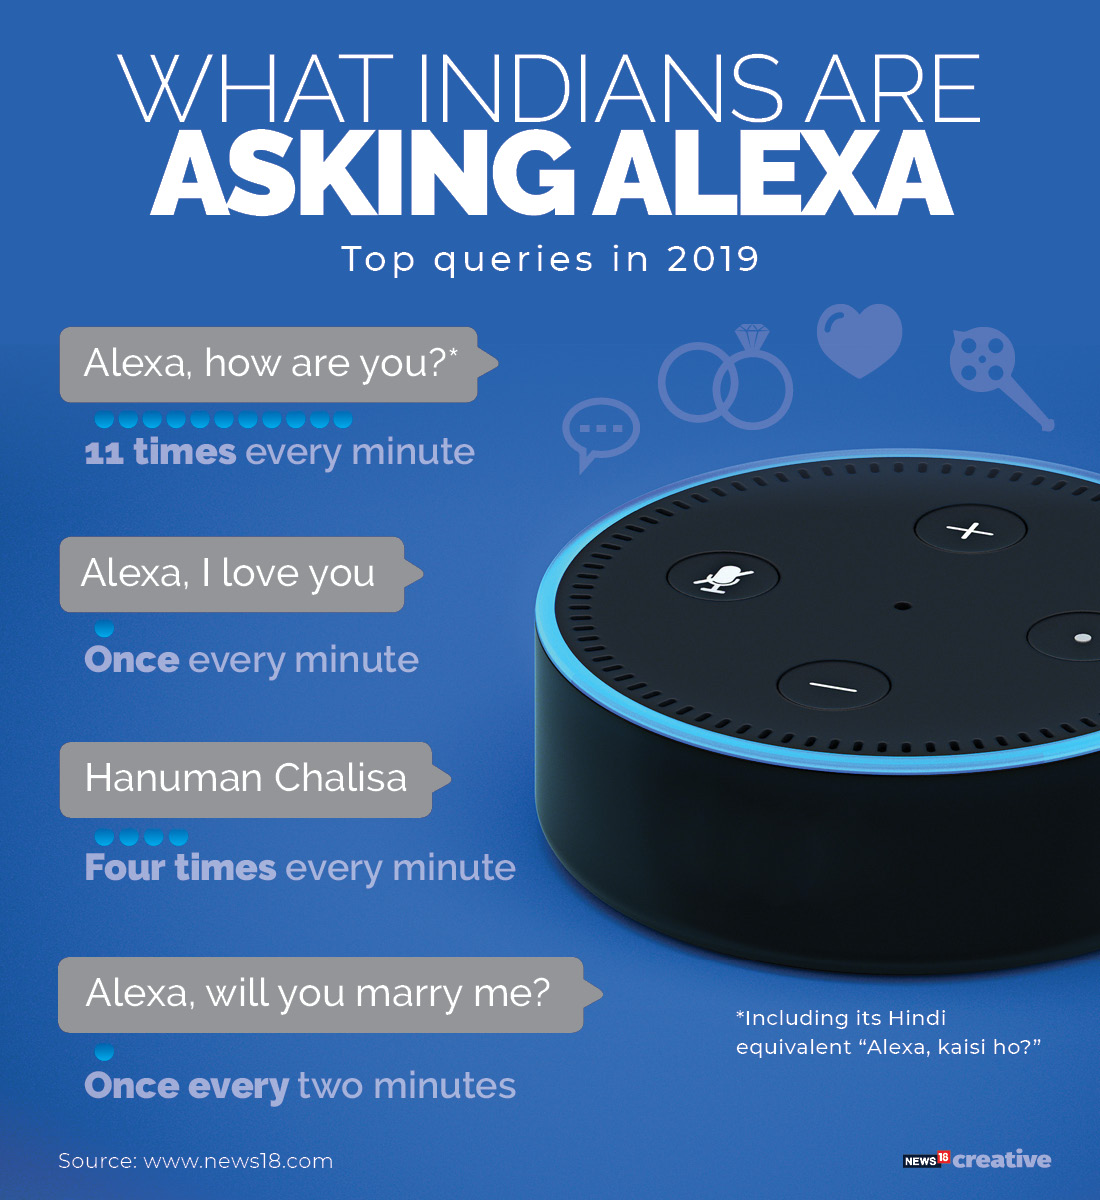 Indians are saying 'Alexa, I love you' once every minute